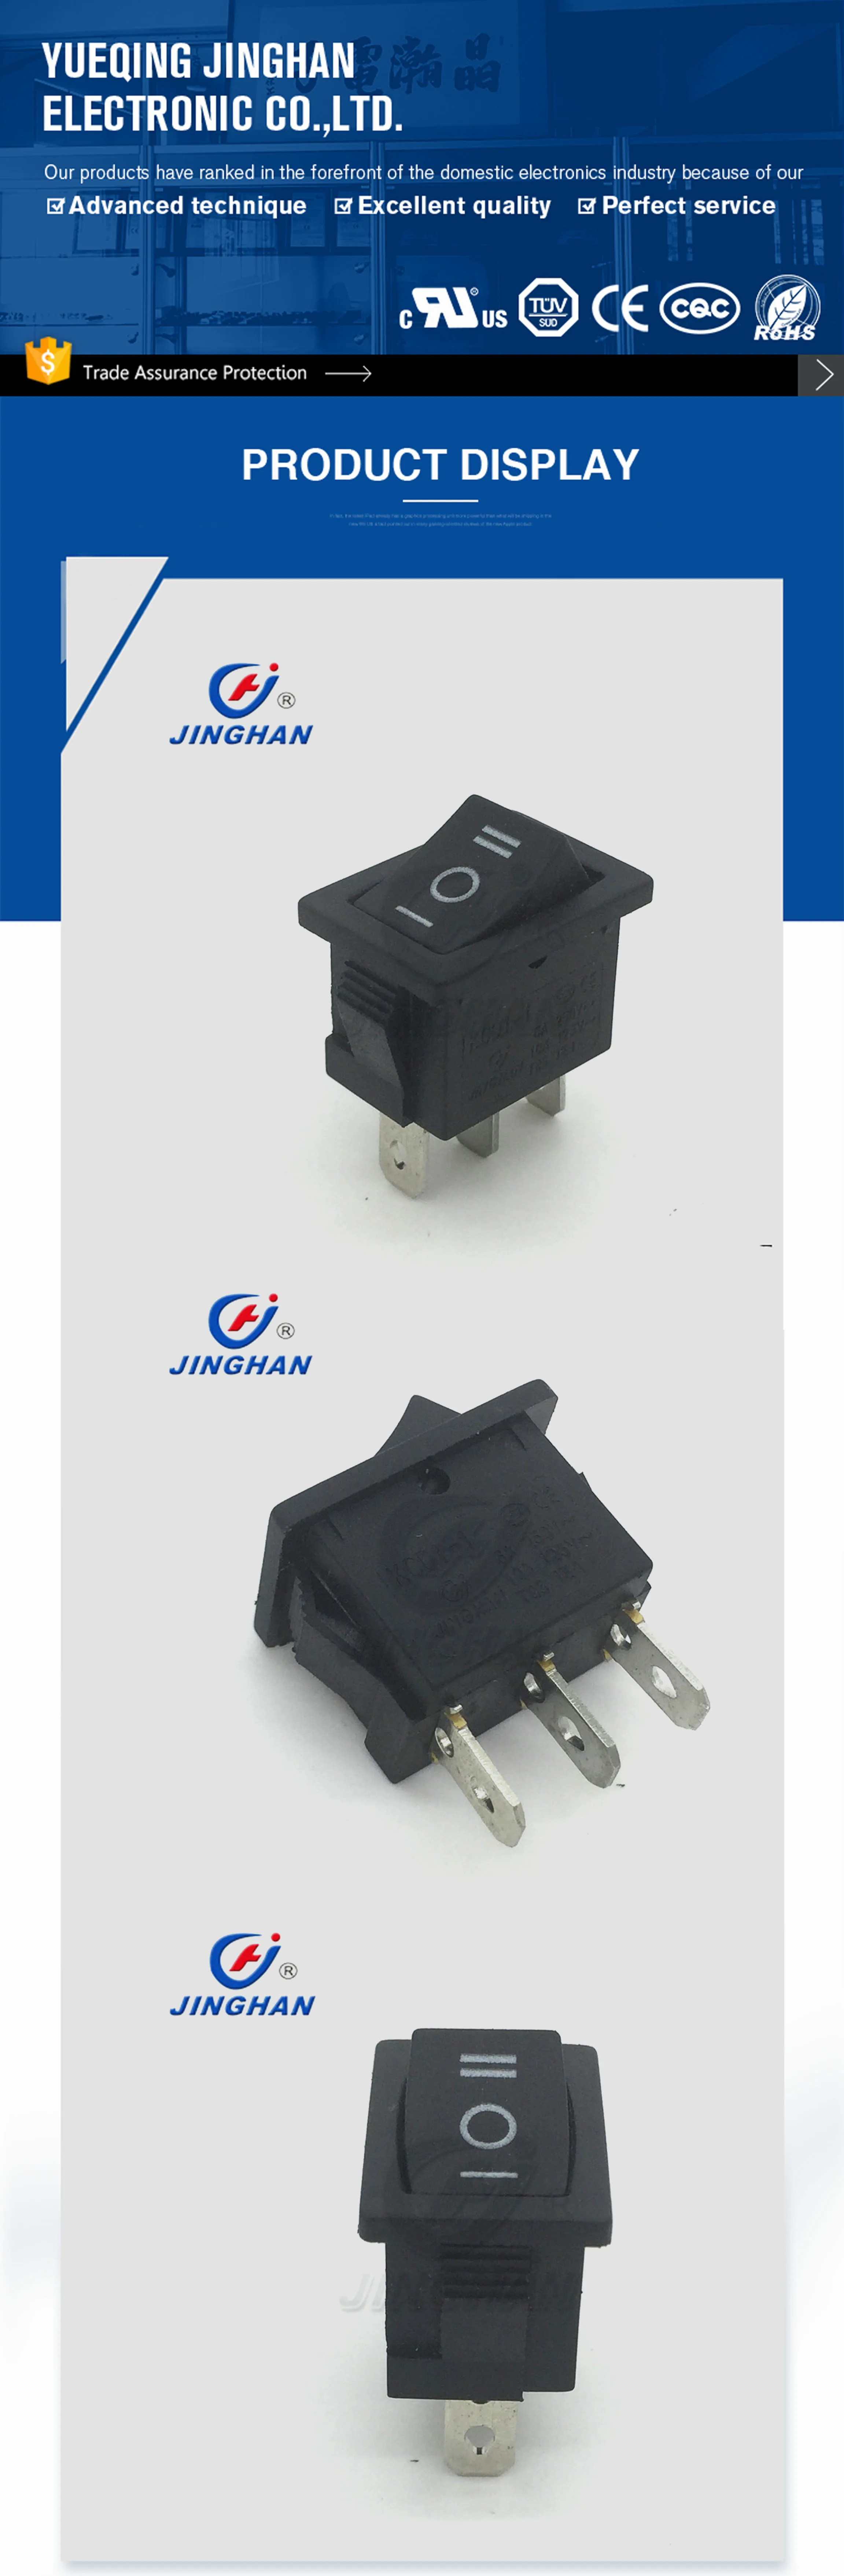 3 Position 3 Pins Rocker Switch On Off On 21 15mm Inside A Rocker Switch Wiring A Rocker Switch Diagram Buy 3 Position Rocker Switch On Off On Rocker Switch 3 Pins Rocker Switch Product On Alibaba Com